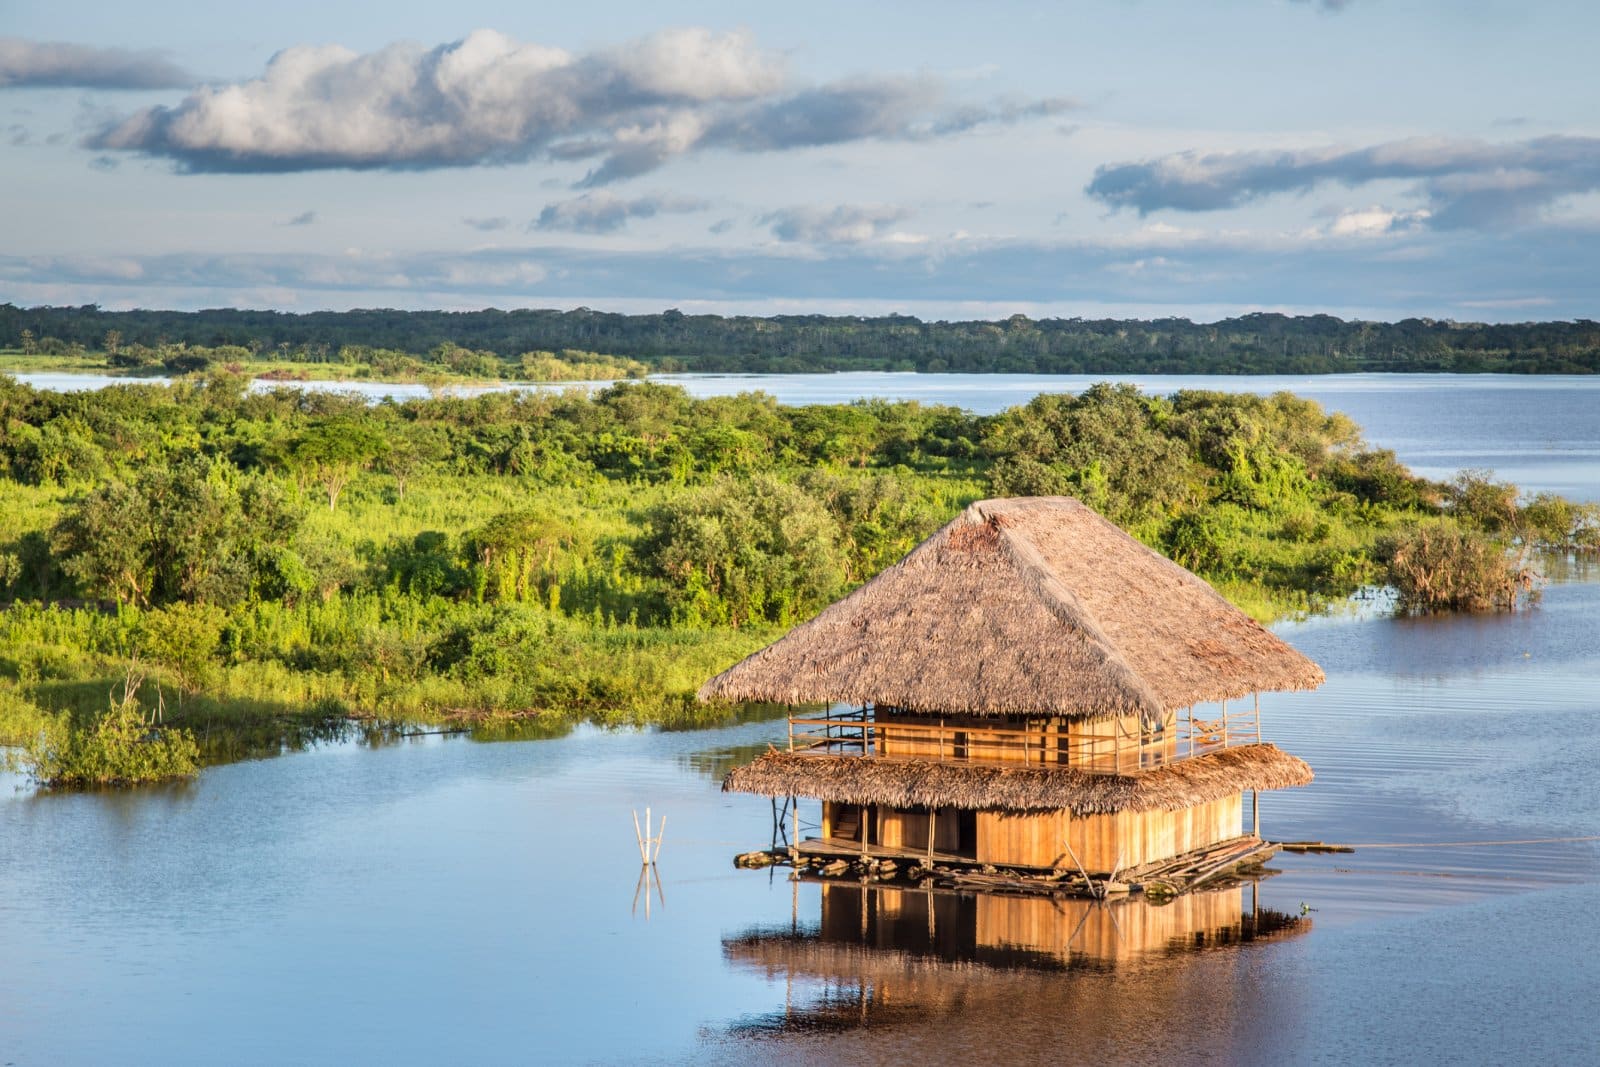 <p class="wp-caption-text">Image Credit: Shutterstock / Christian Vinces</p>  <p><span>Iquitos, a bustling city accessible only by river or air, serves as the gateway to the Peruvian Amazon and its shamanic traditions. The city is surrounded by rivers and rainforests, offering access to numerous indigenous communities and retreat centers where visitors can engage in traditional ayahuasca ceremonies led by experienced shamans. These ceremonies are intended for deep spiritual exploration and healing, guided by the powerful plant medicine known to induce visionary states of consciousness.</span></p>